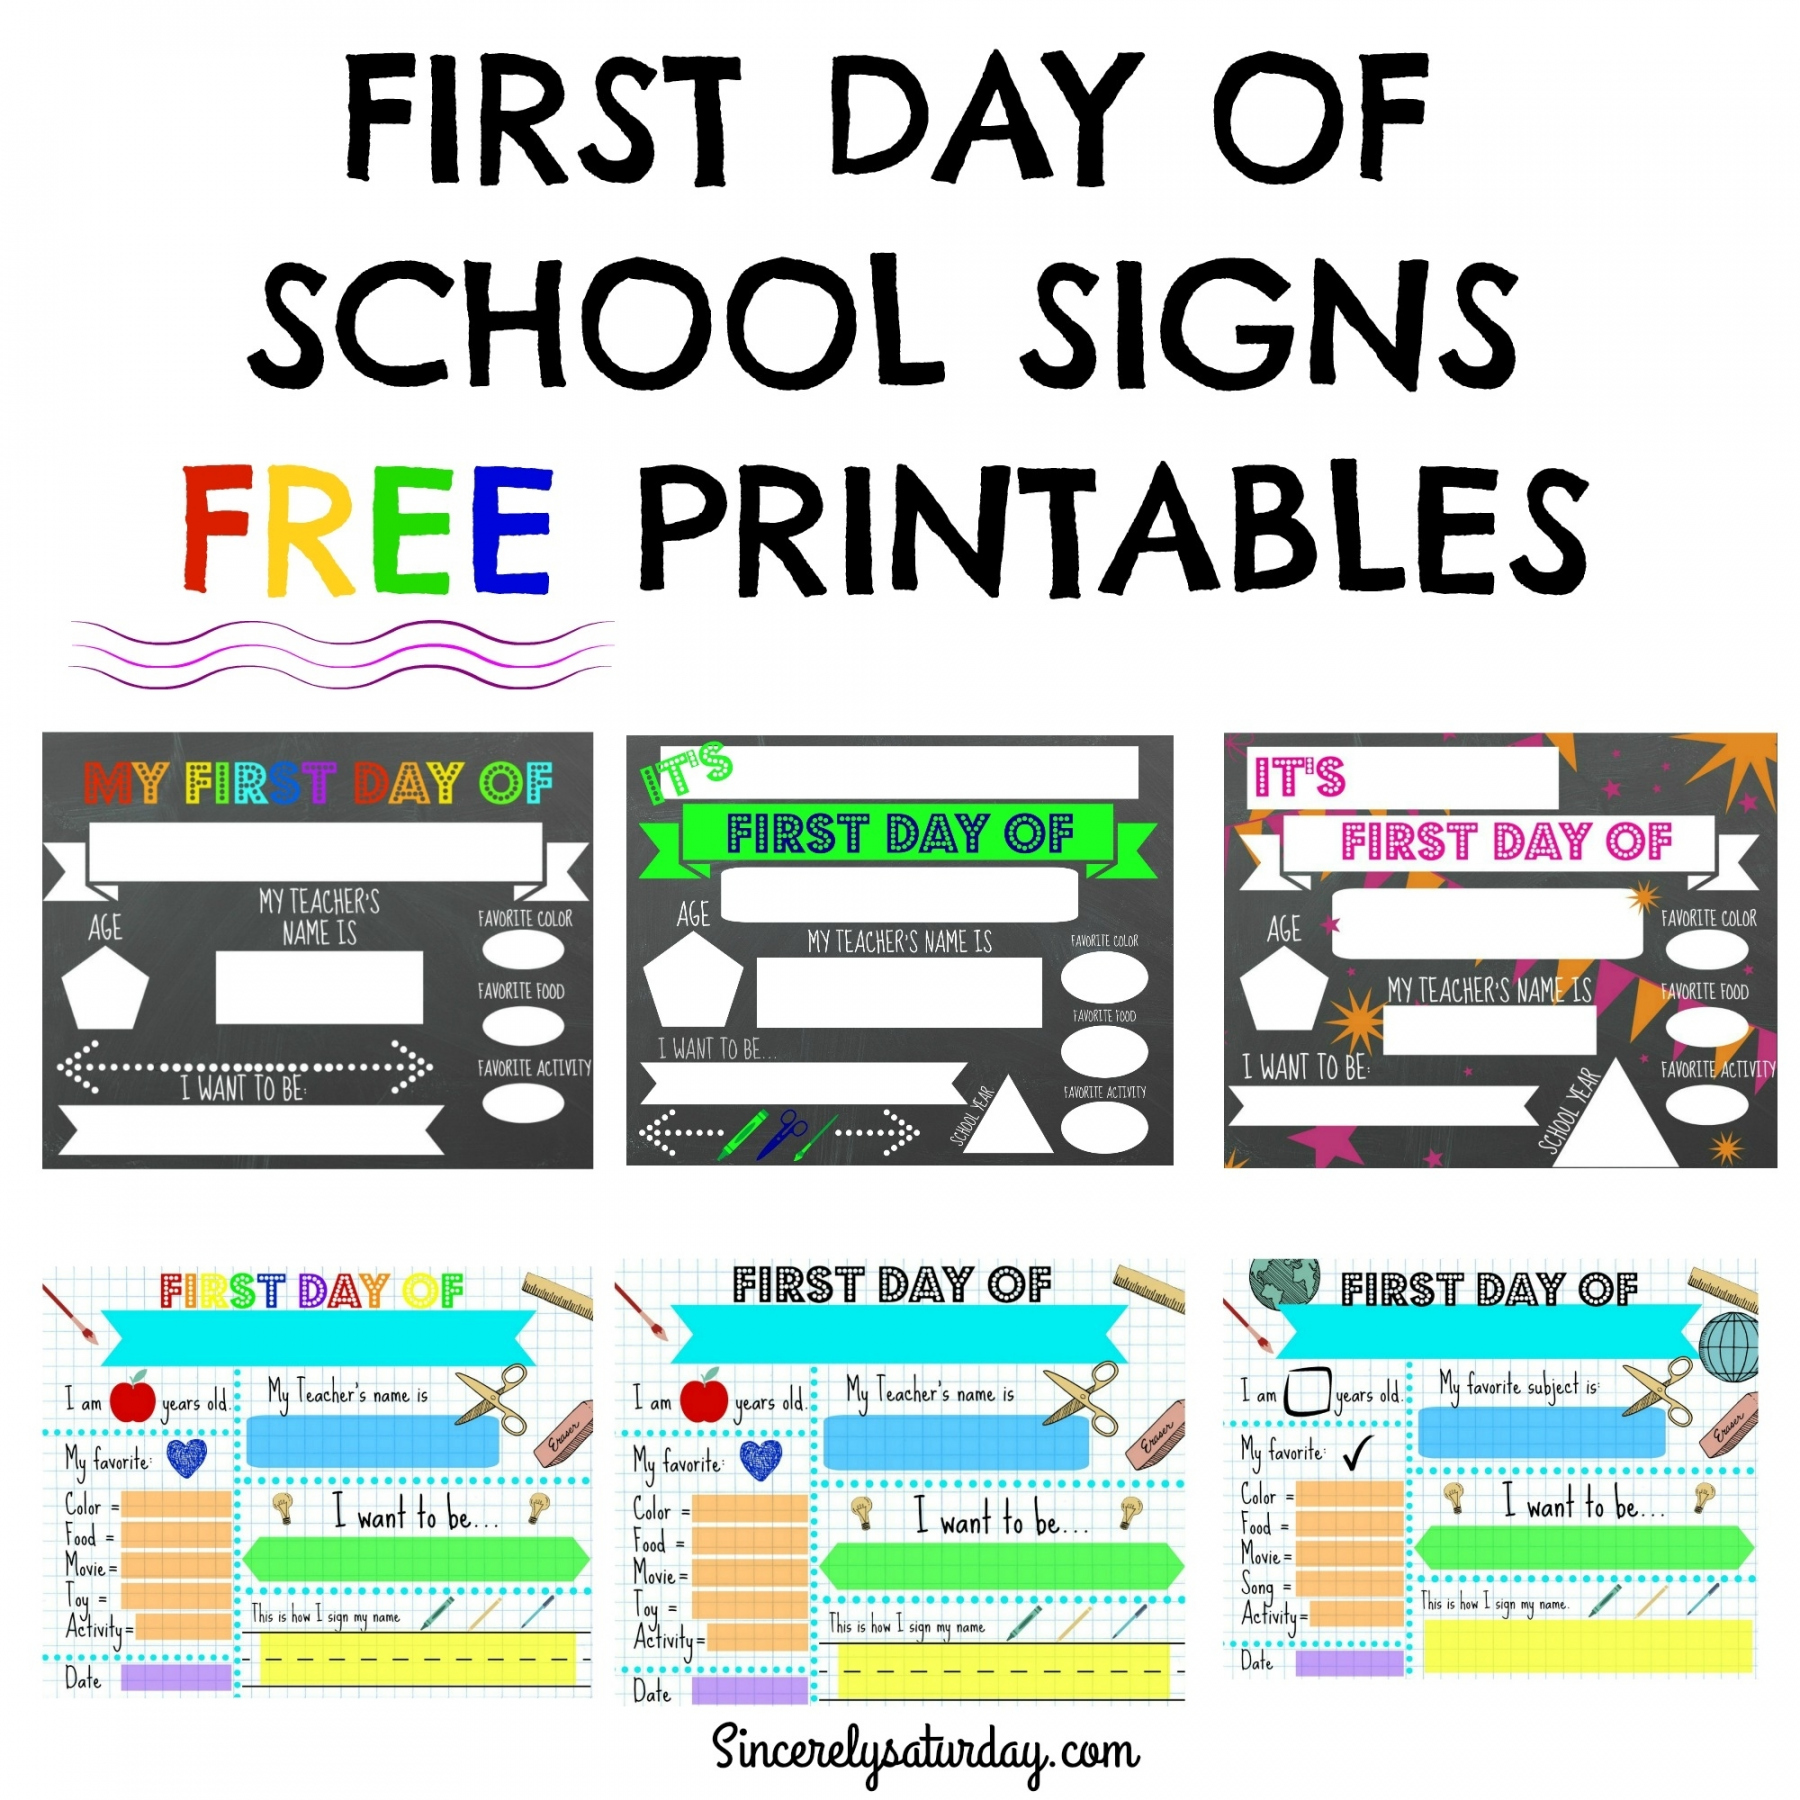 printable-first-day-of-school-signs-for-students-to-use-on-their-classroom-desks